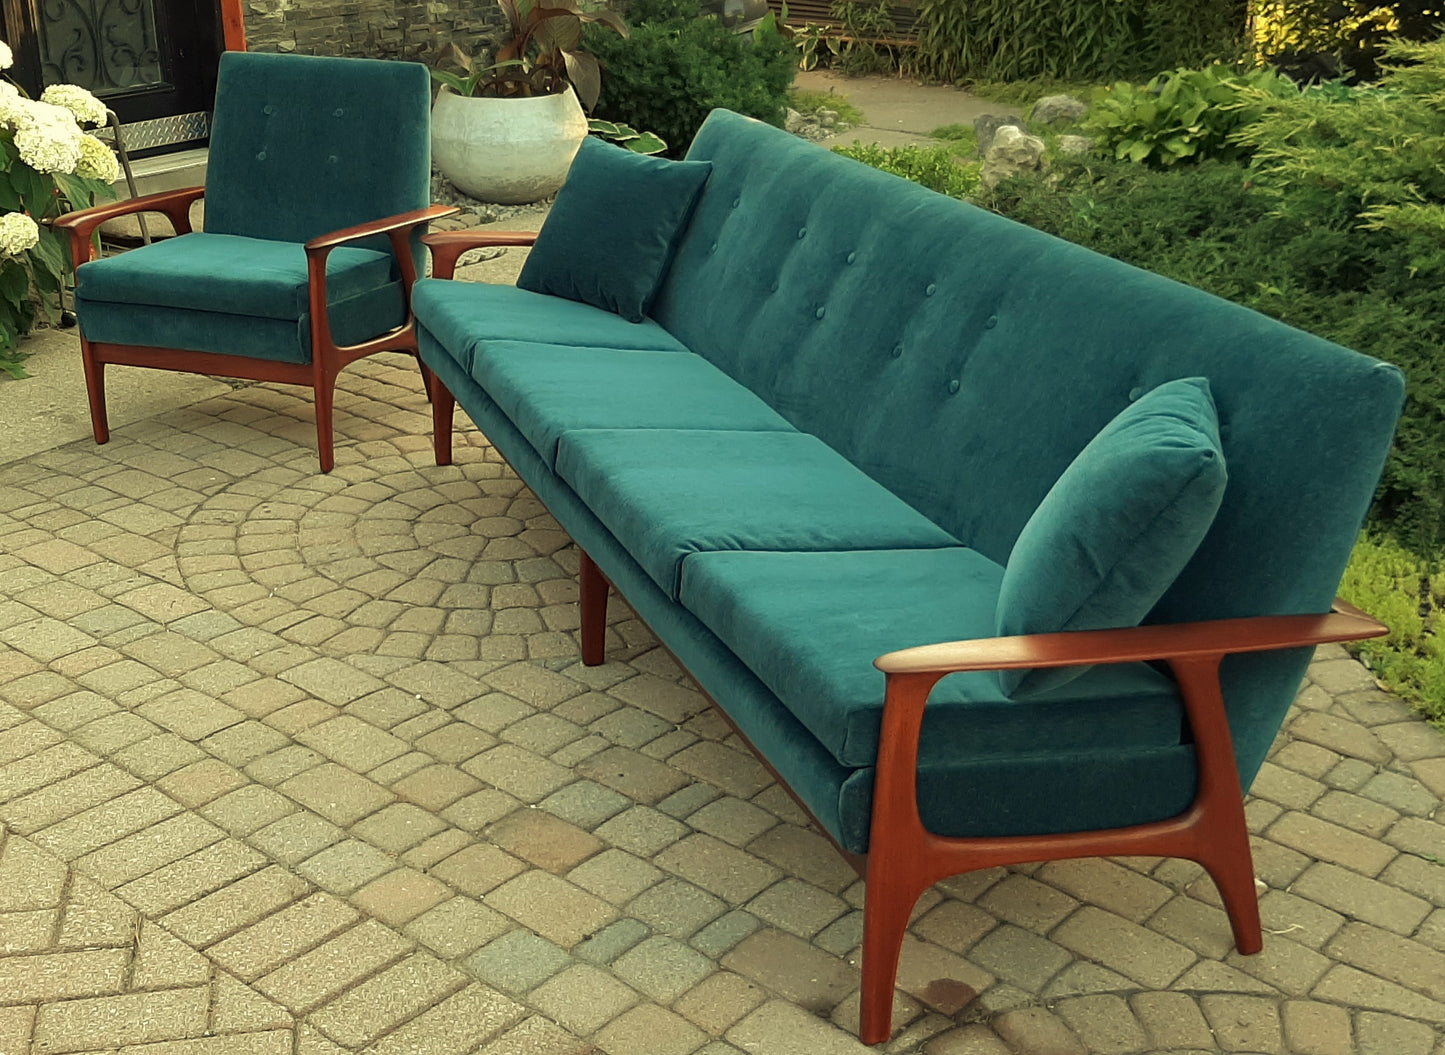 REFINISHED REUPHOLSTERED Danish MCM Teak 4-Seater Sofa & Lounge chair in teal performance fabric - PERFECT